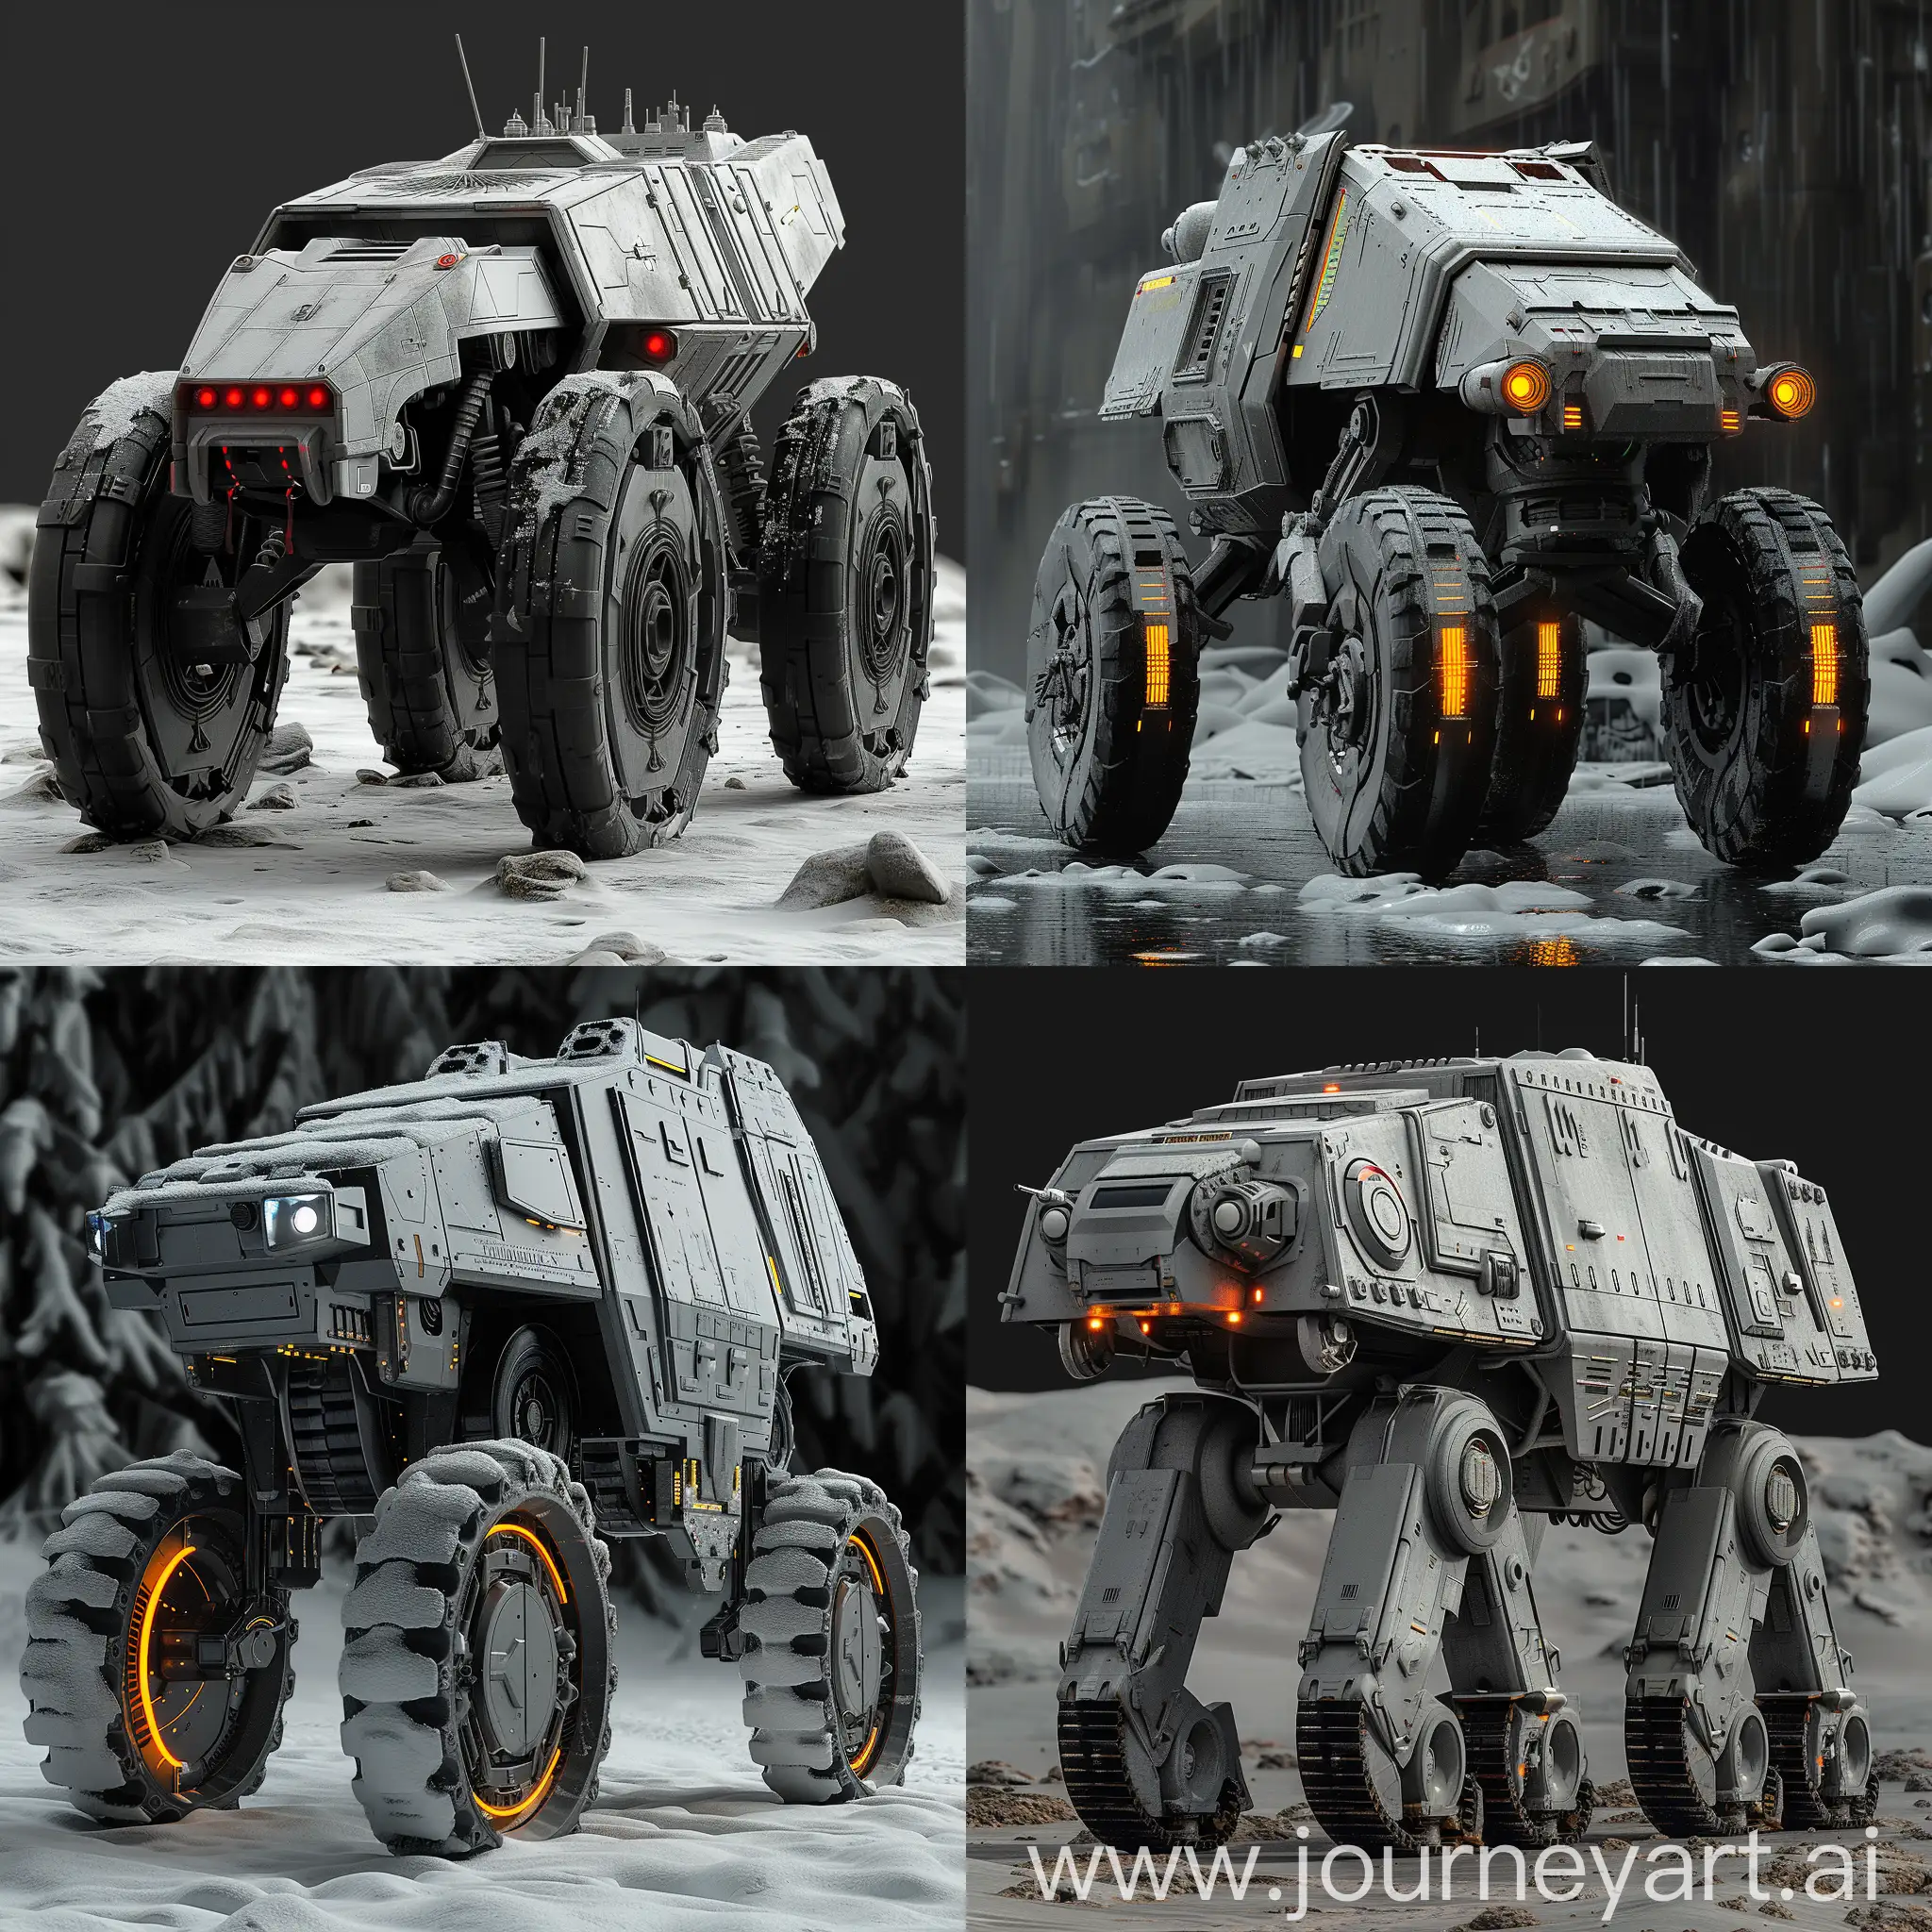 Futuristic-All-Terrain-Armored-Transport-with-Advanced-Technology-and-Ecofriendly-Features